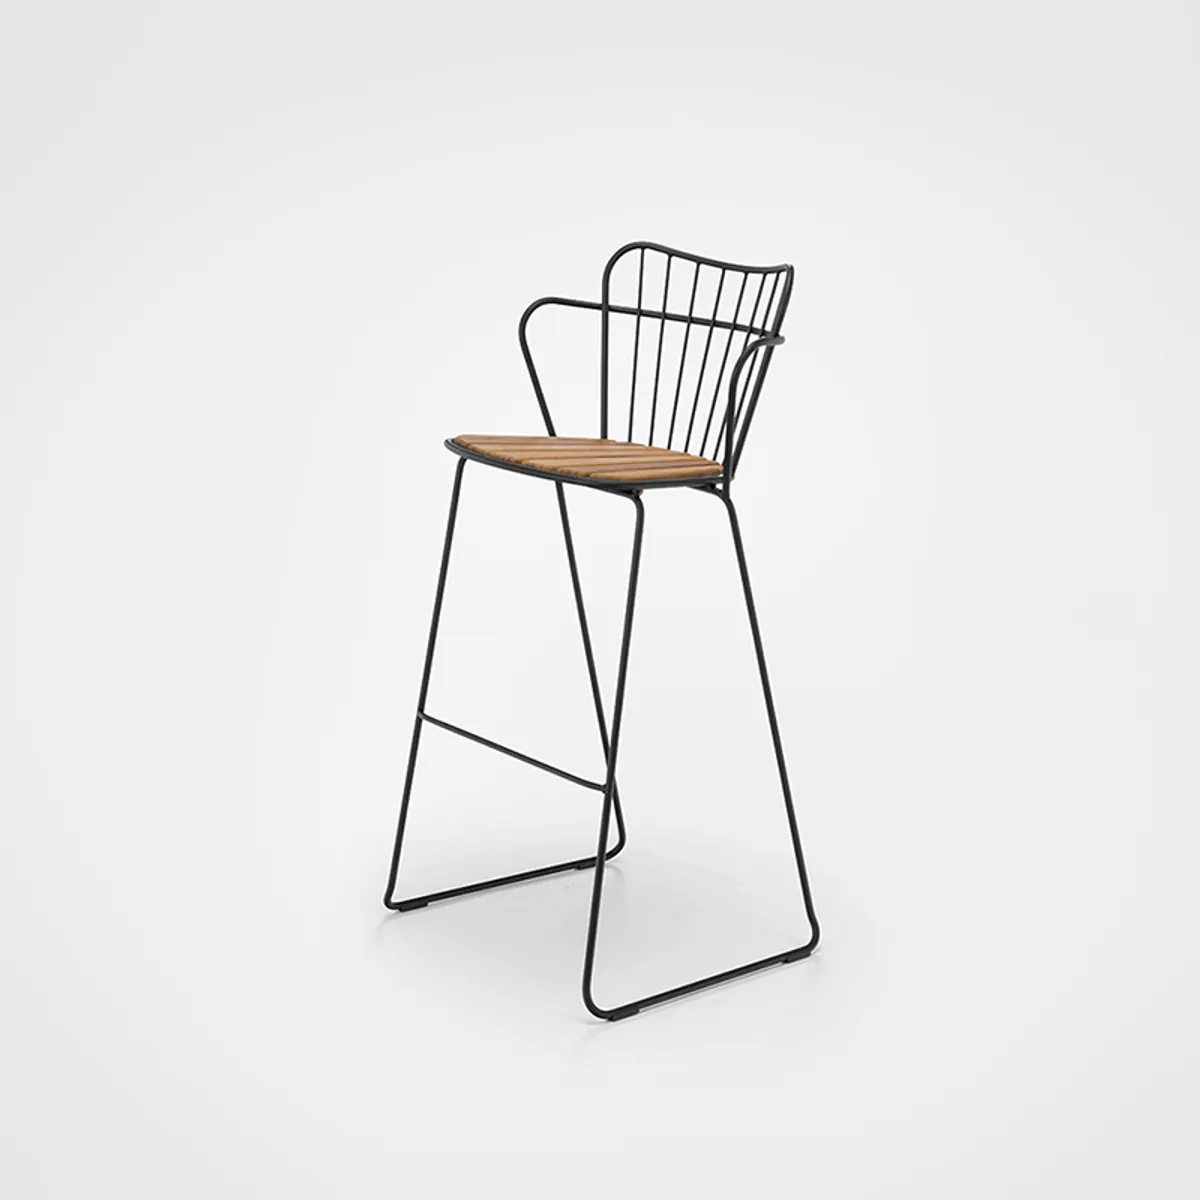 Plumage Bar Stool In Black Metal With Bamboo Seat Outdoor Furniture For Bars